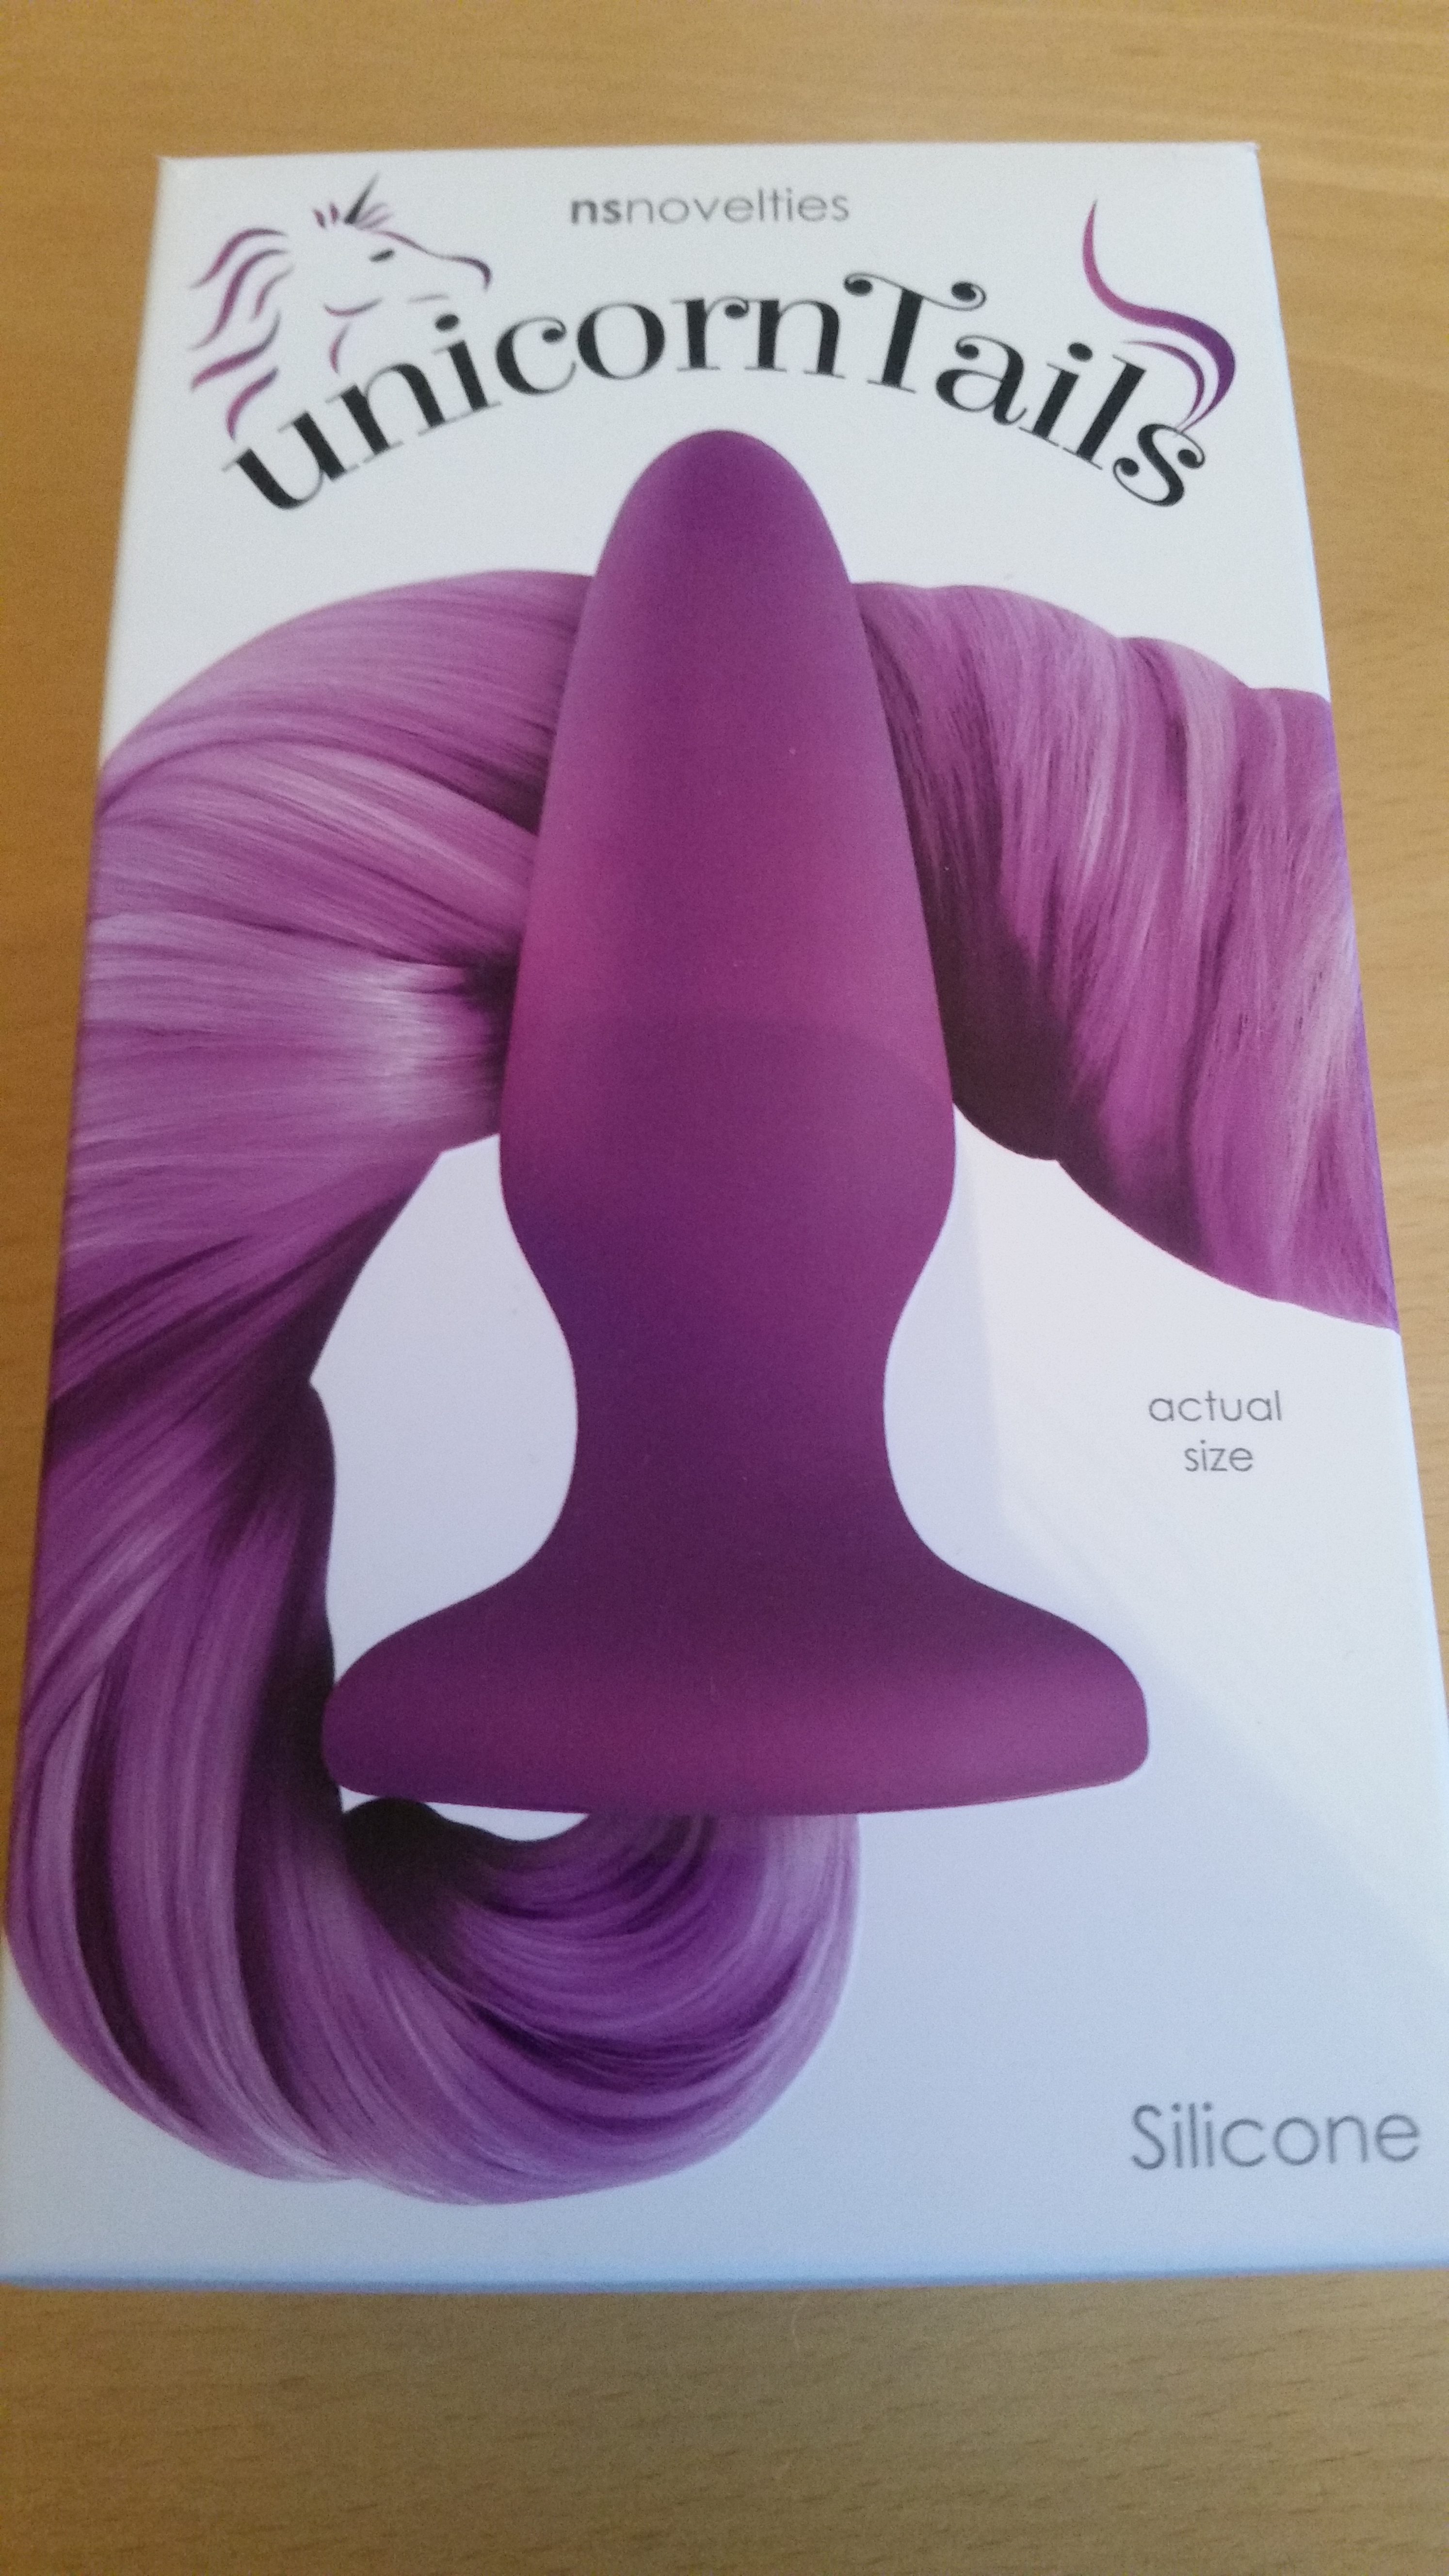 The NS Novelties purple unicorn tail butt plug, boxed. For a product review.